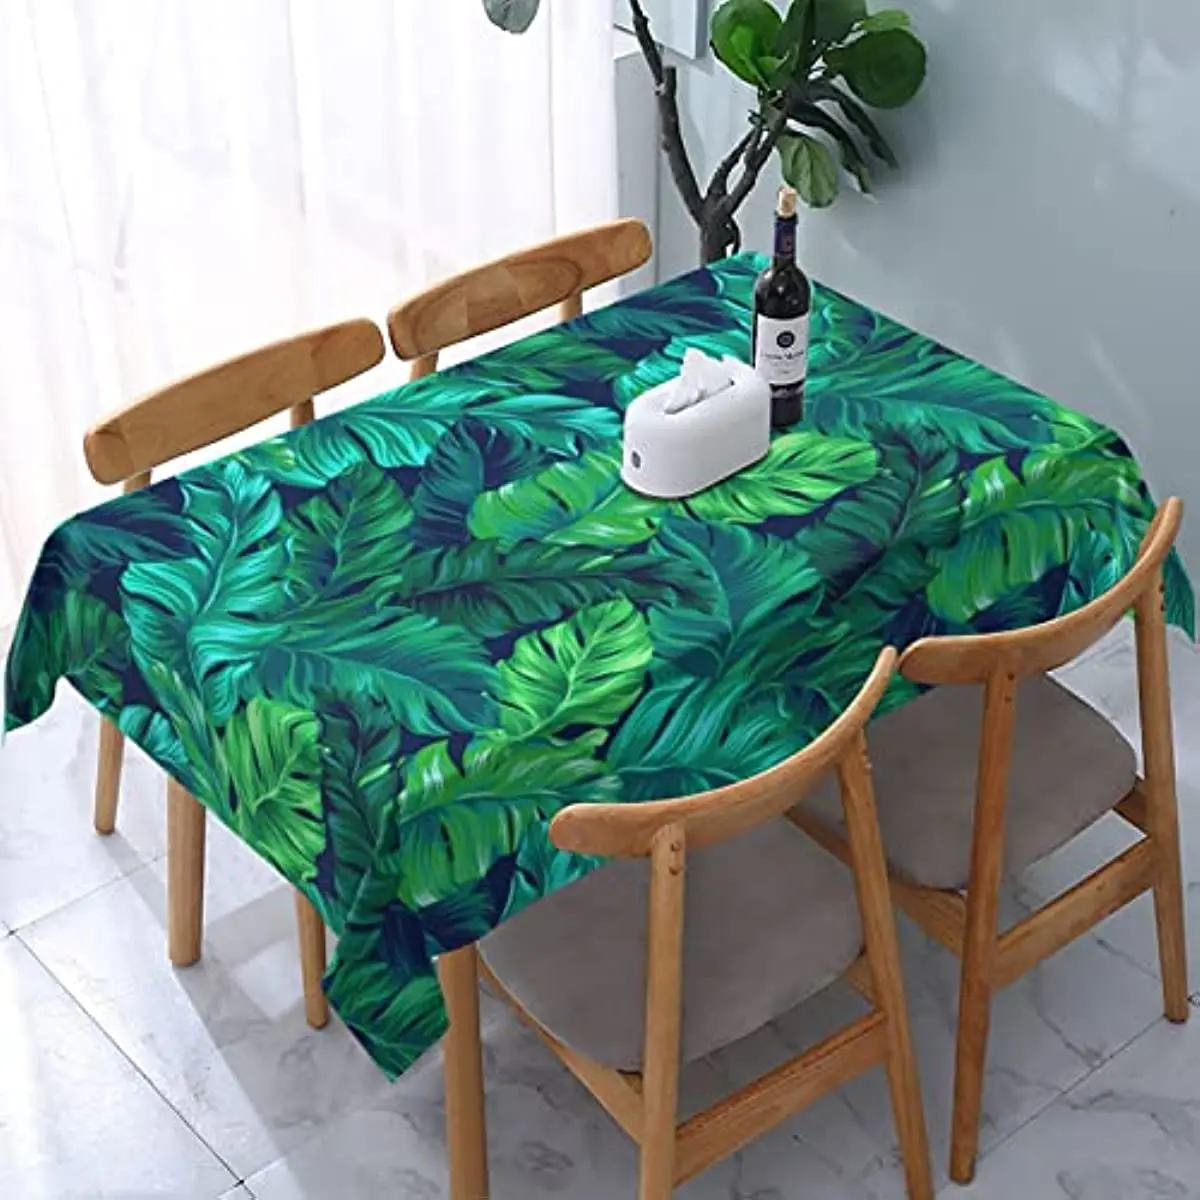 

Tropical Hawaiian Leaves Turquoise Leaf Waterproof Tablecloth Party Decorations Polyester Dining Table Cloth Kitchen Decor